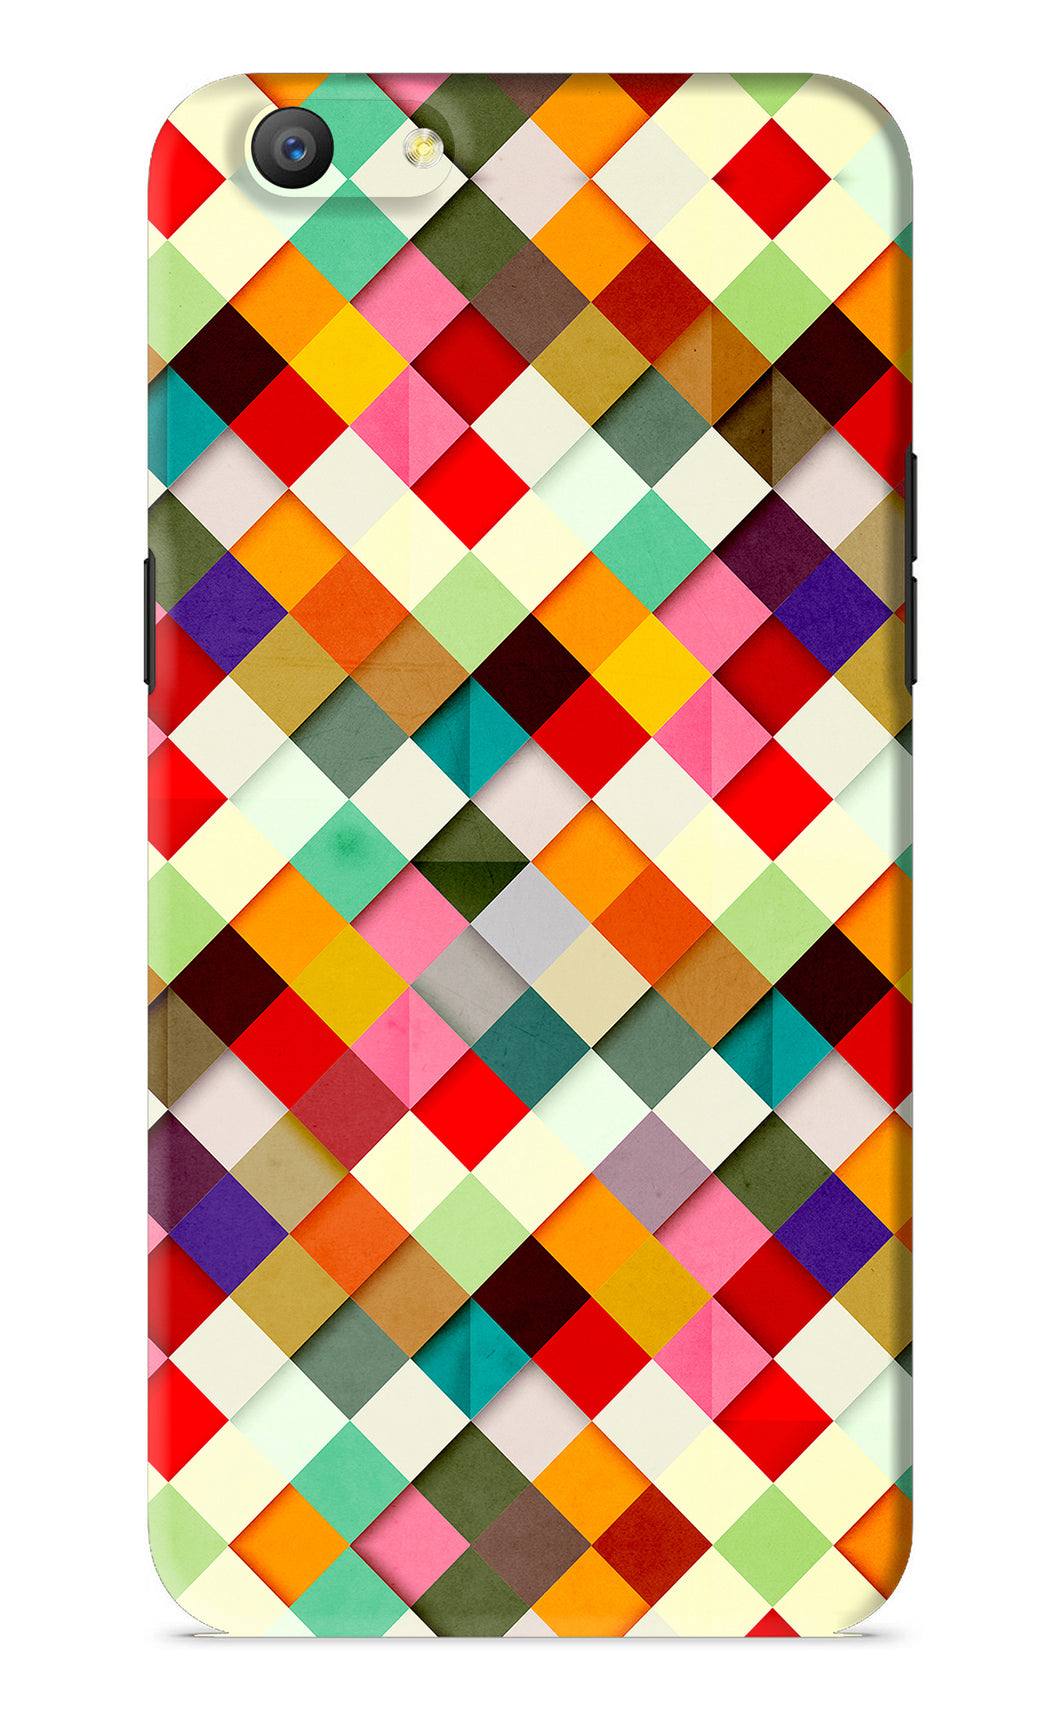 Geometric Abstract Colorful Oppo A57 Back Skin Wrap